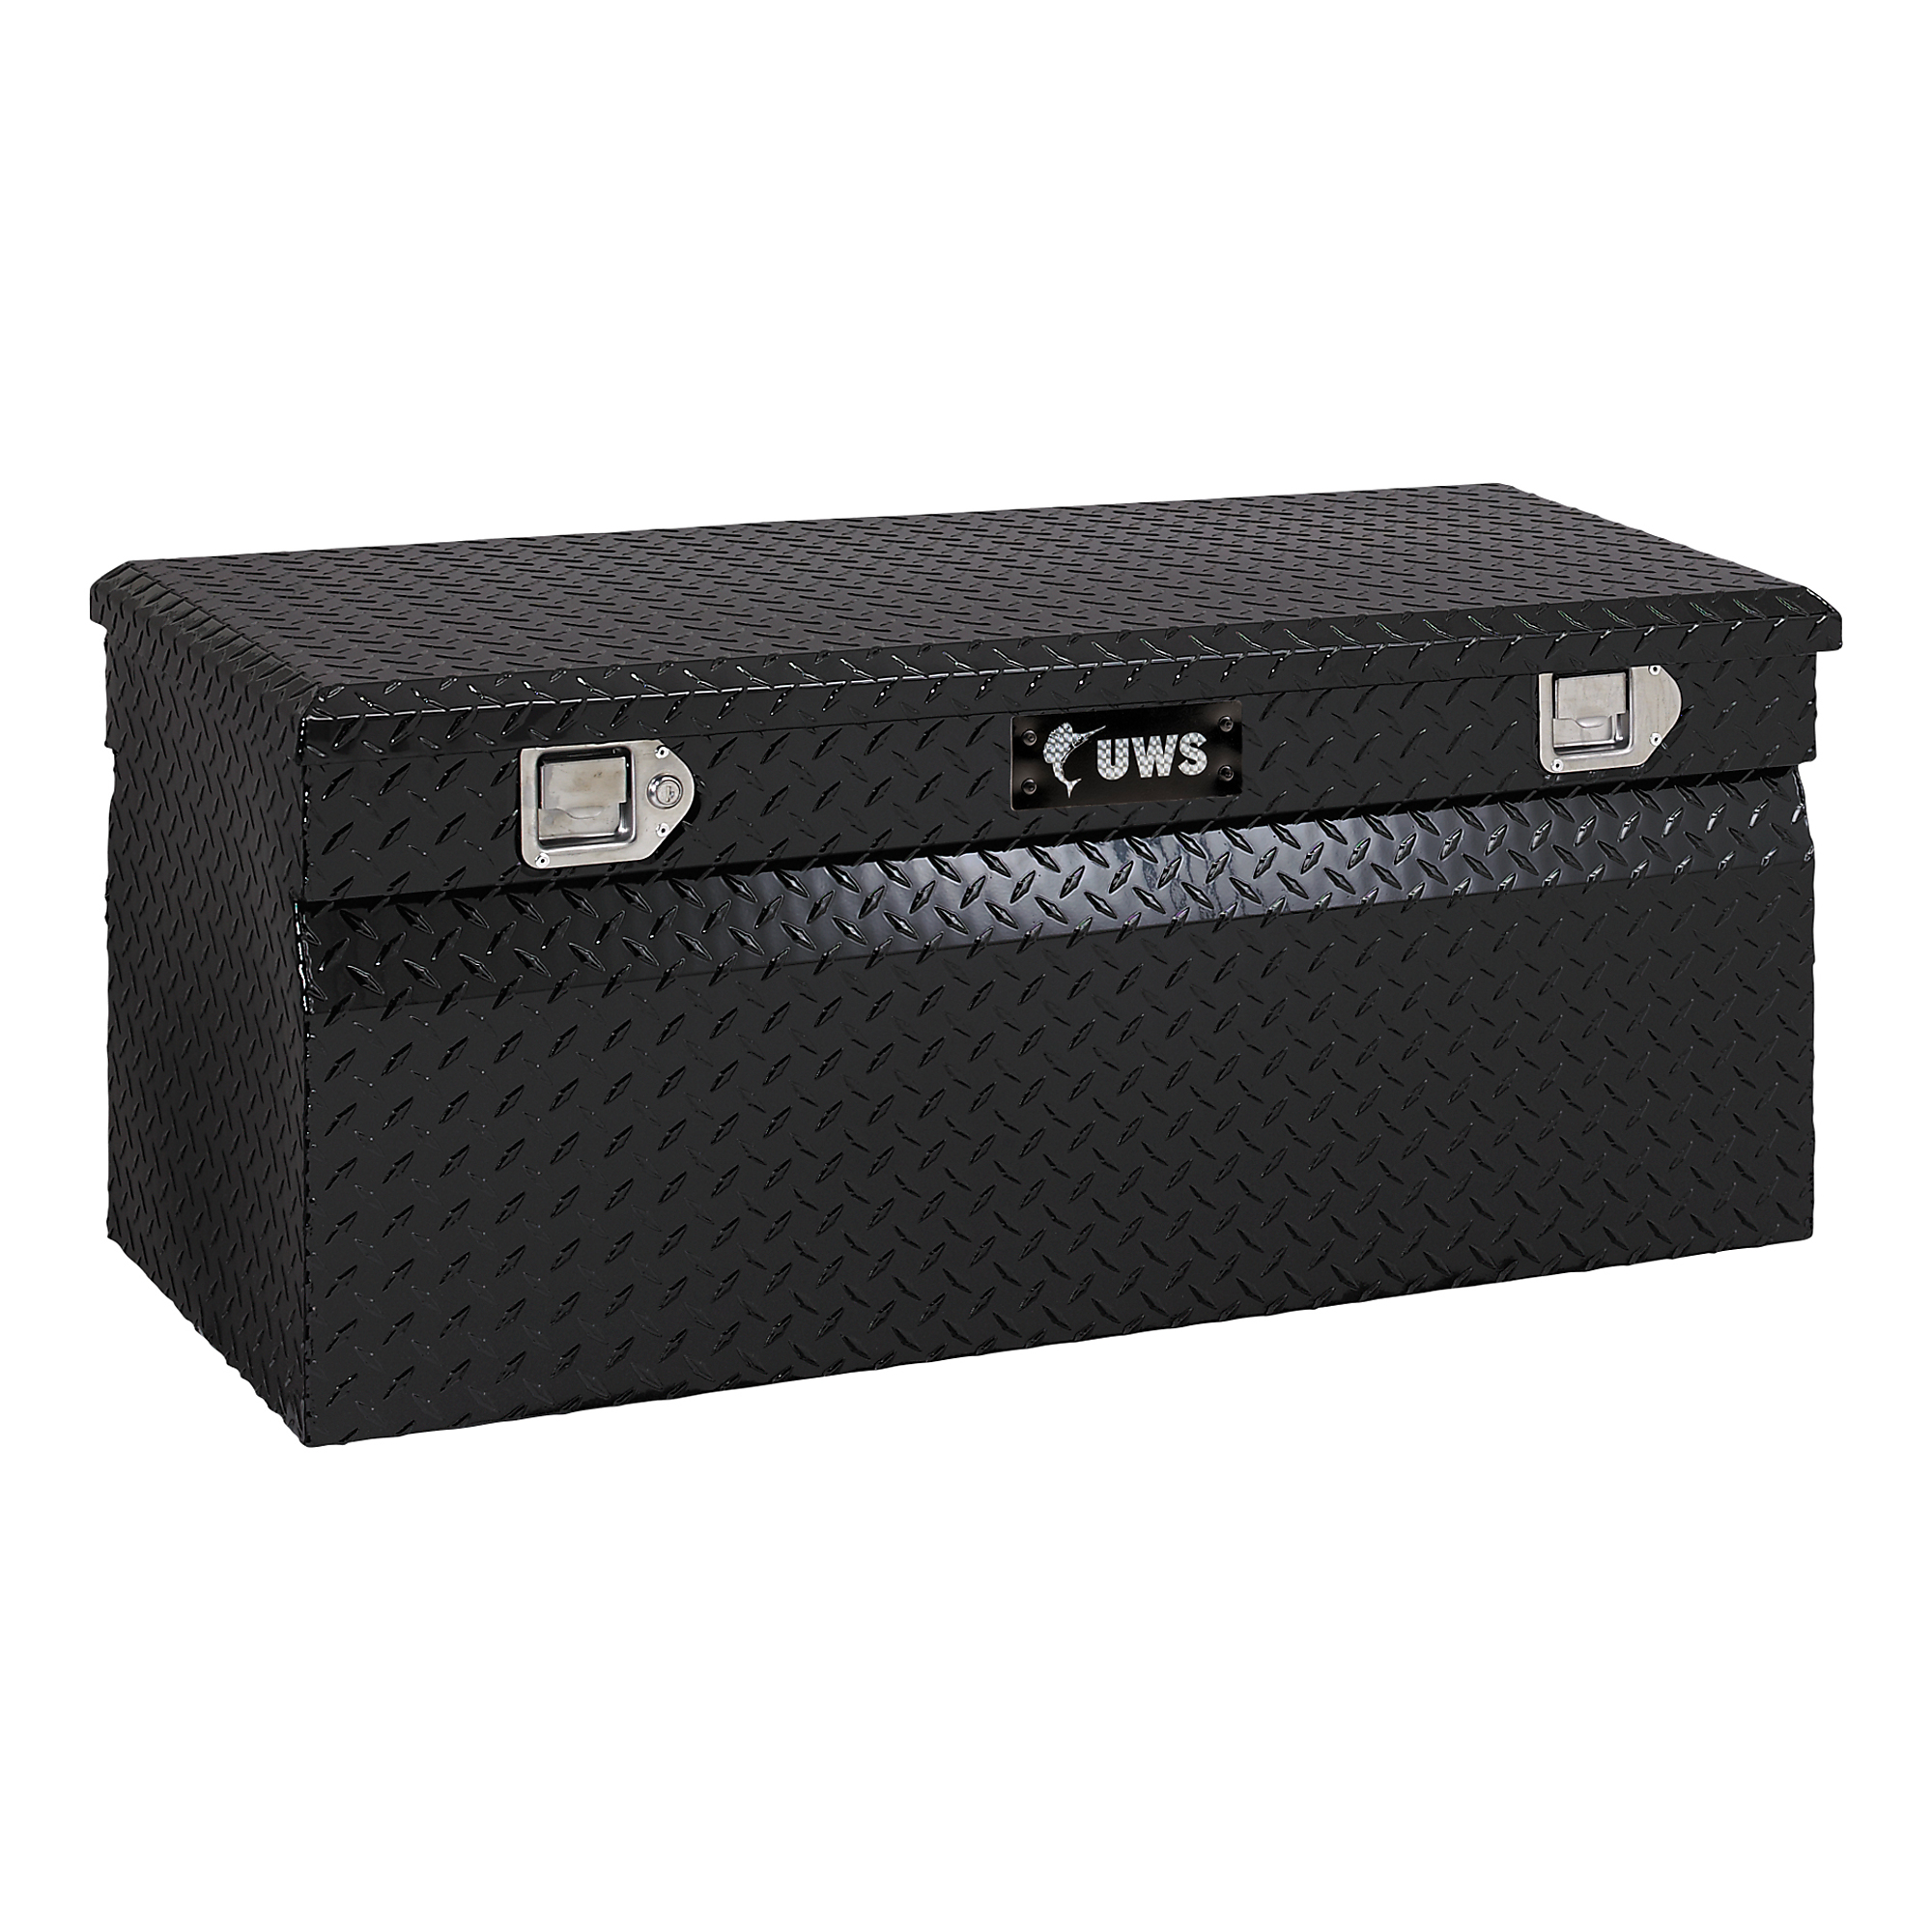 UWS, 48Inch Utility Chest Box, Width 47.875 in, Material Aluminum, Color Finish Gloss Black, Model EC20252